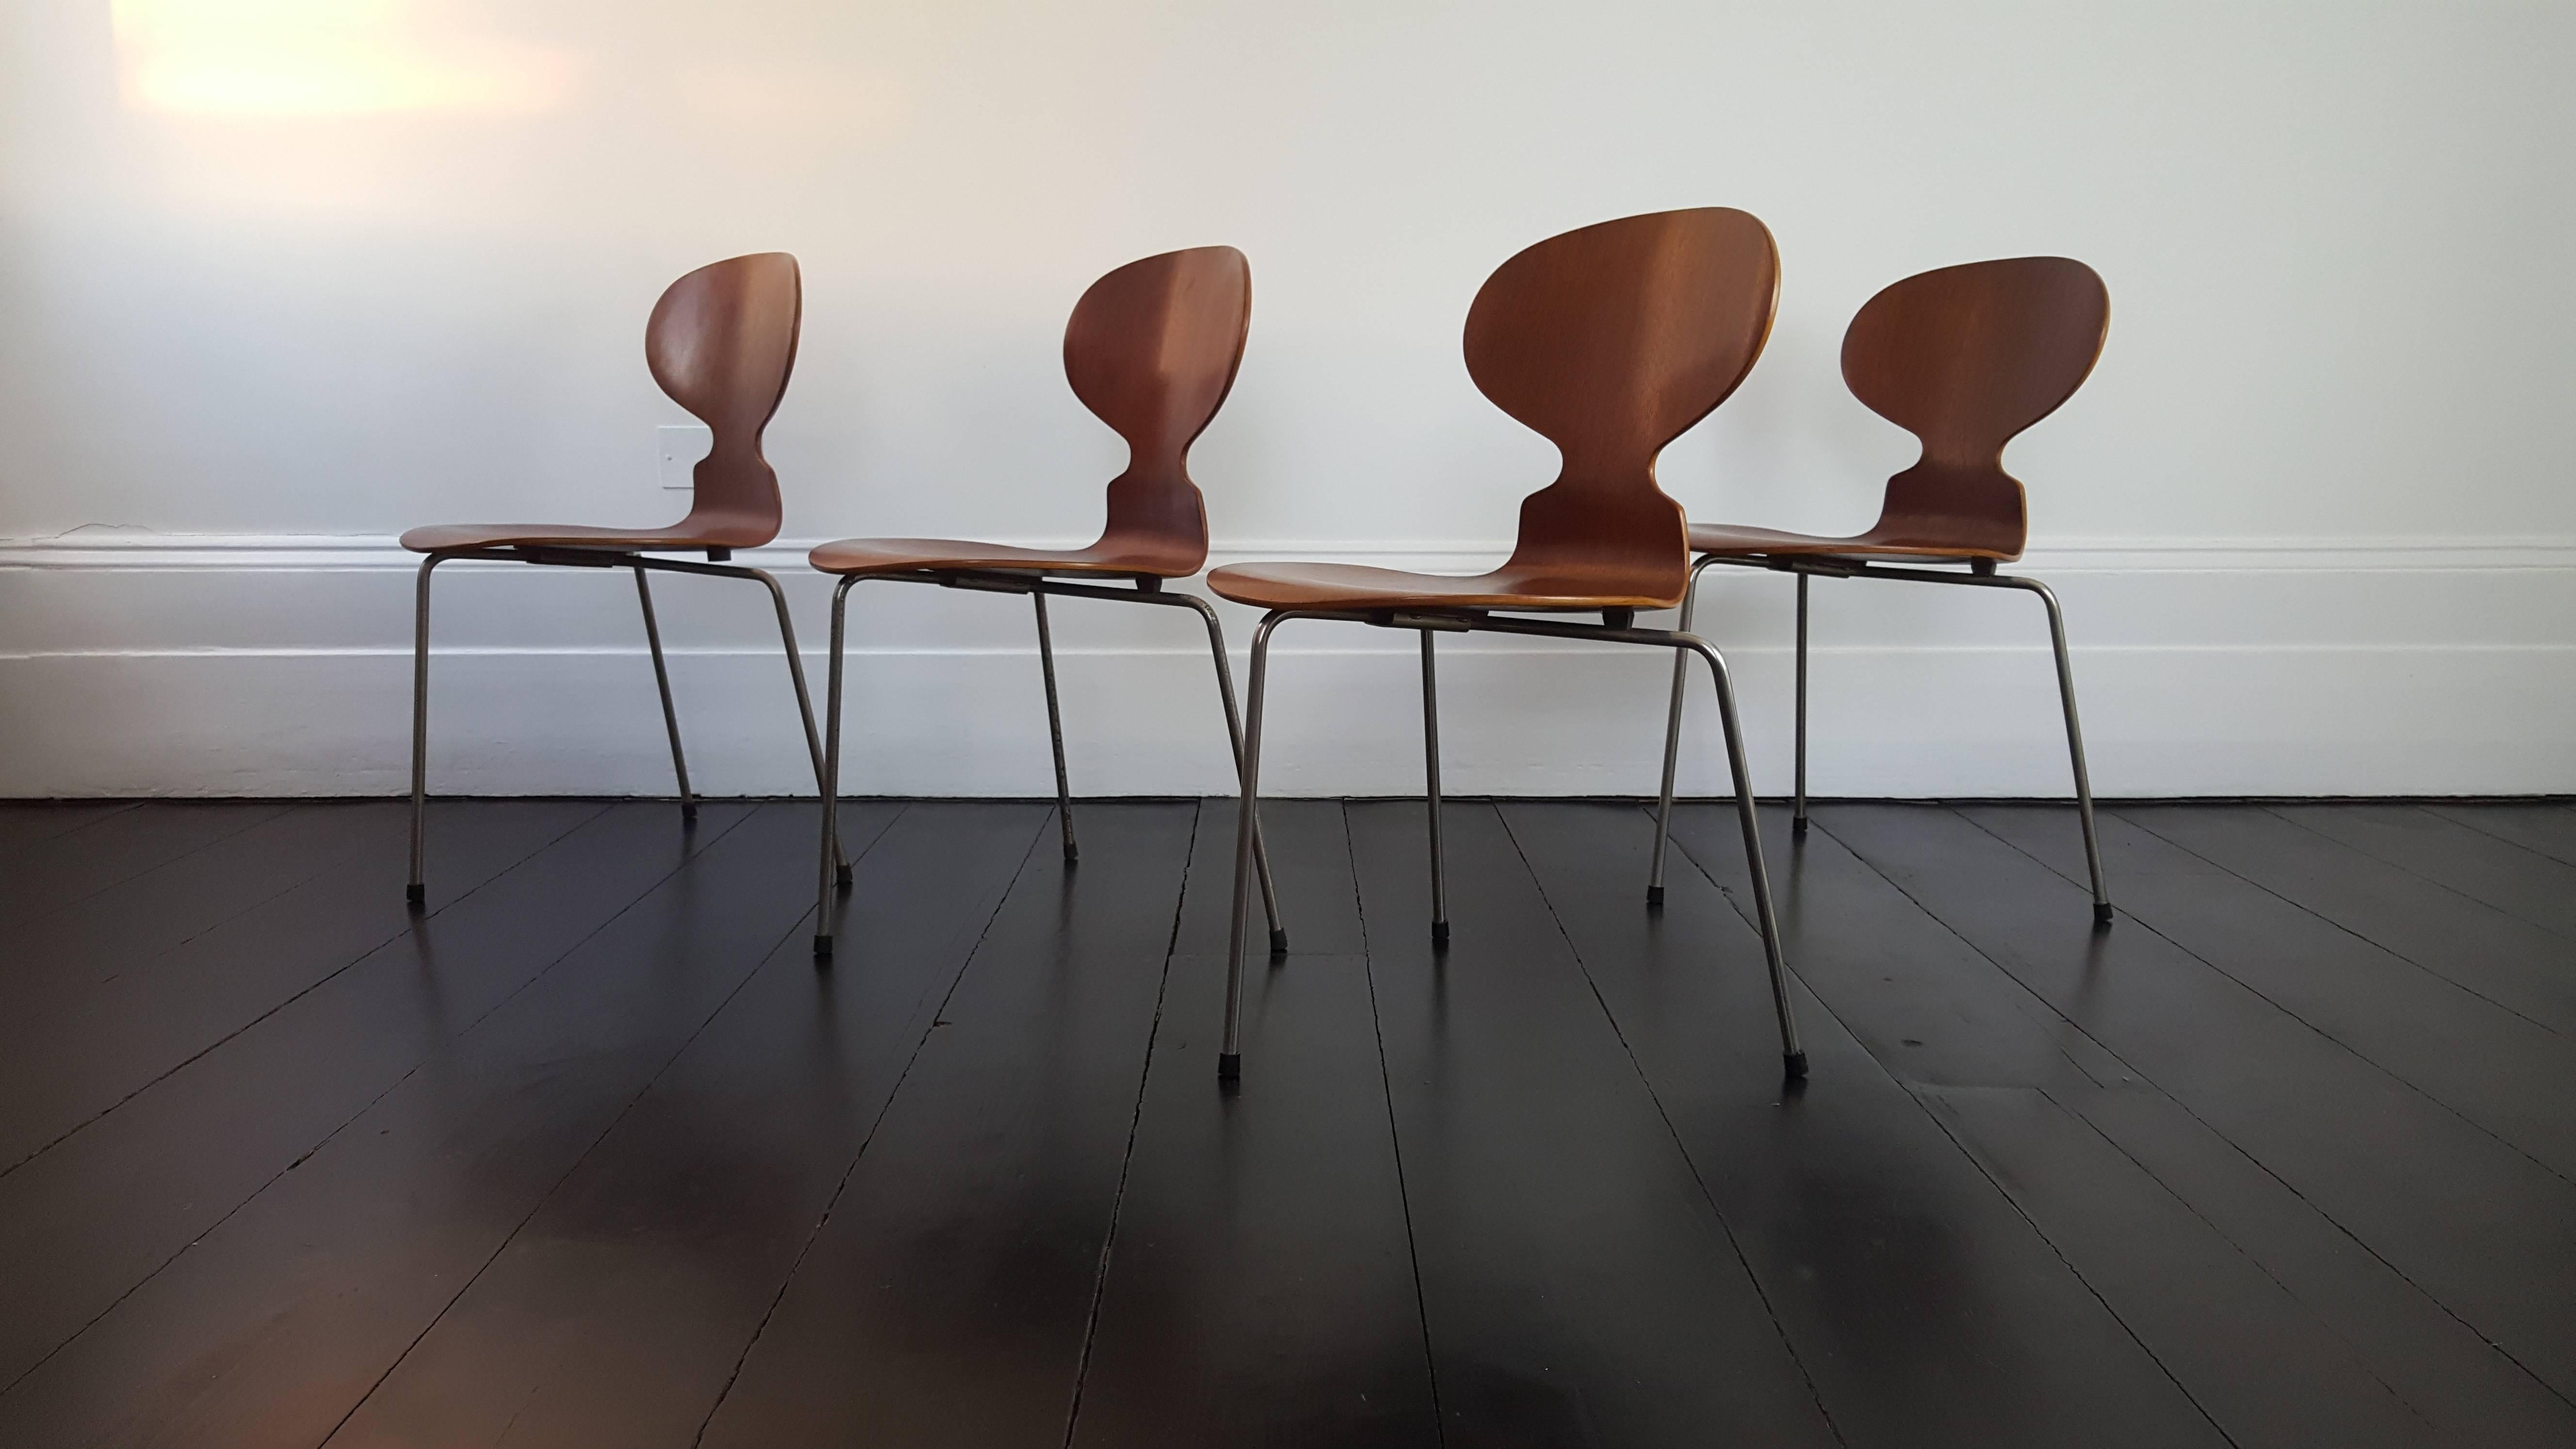 Iconic model 3100 'Ant' chair by Arne Jacobsen for Fritz Hansen.

The model 3100 'Ant' chairs were designed by Arne Jacobsen in 1952. Teak veneer seats on steel frame.

We provide very competitive global shipping rates per your requirements - please